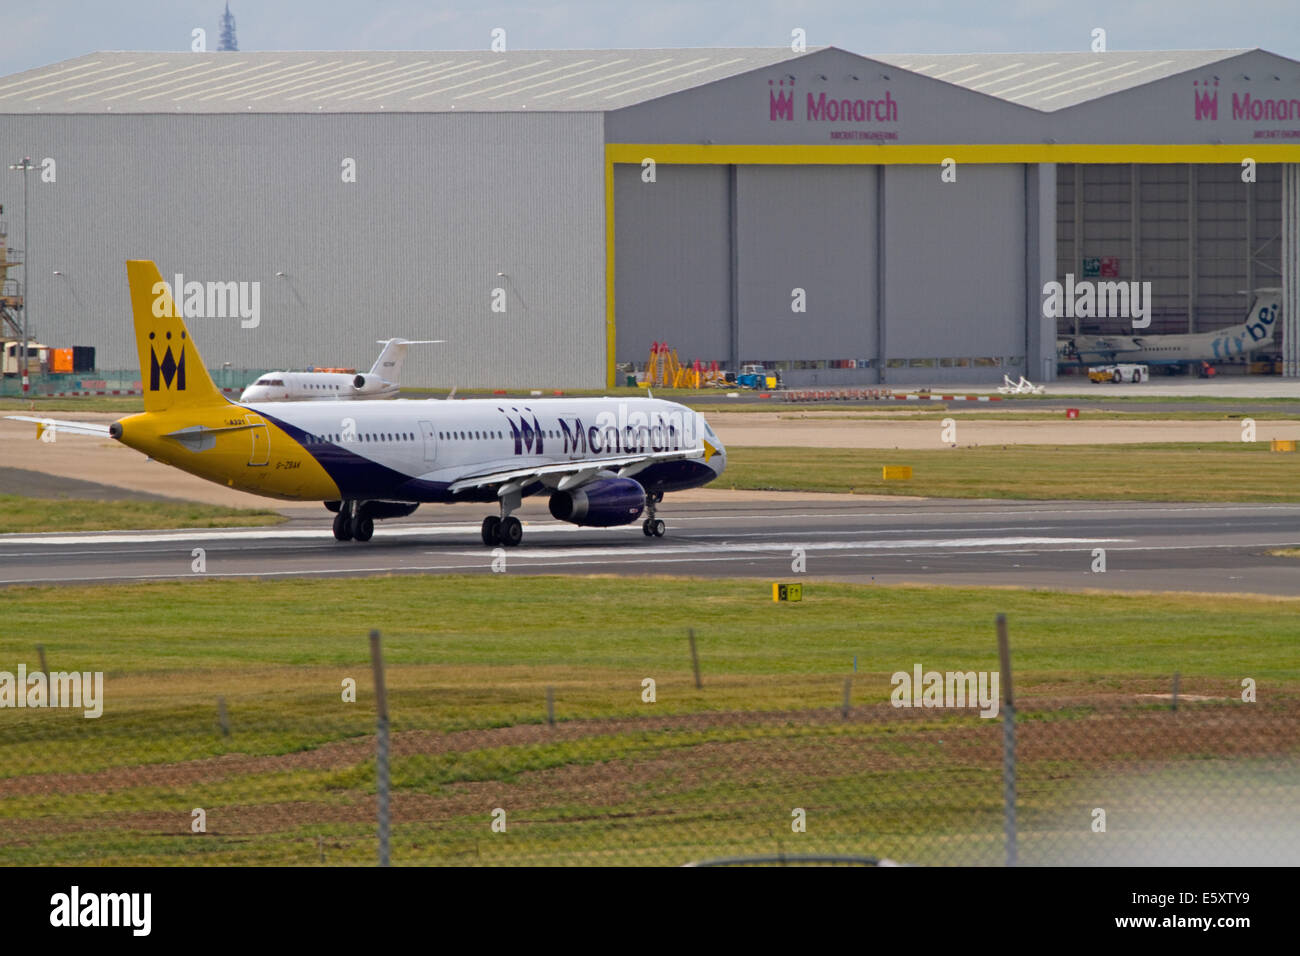 Monarch Airlines aircraft taxiing near Monarch hangers. Birmingham Airport Stock Photo